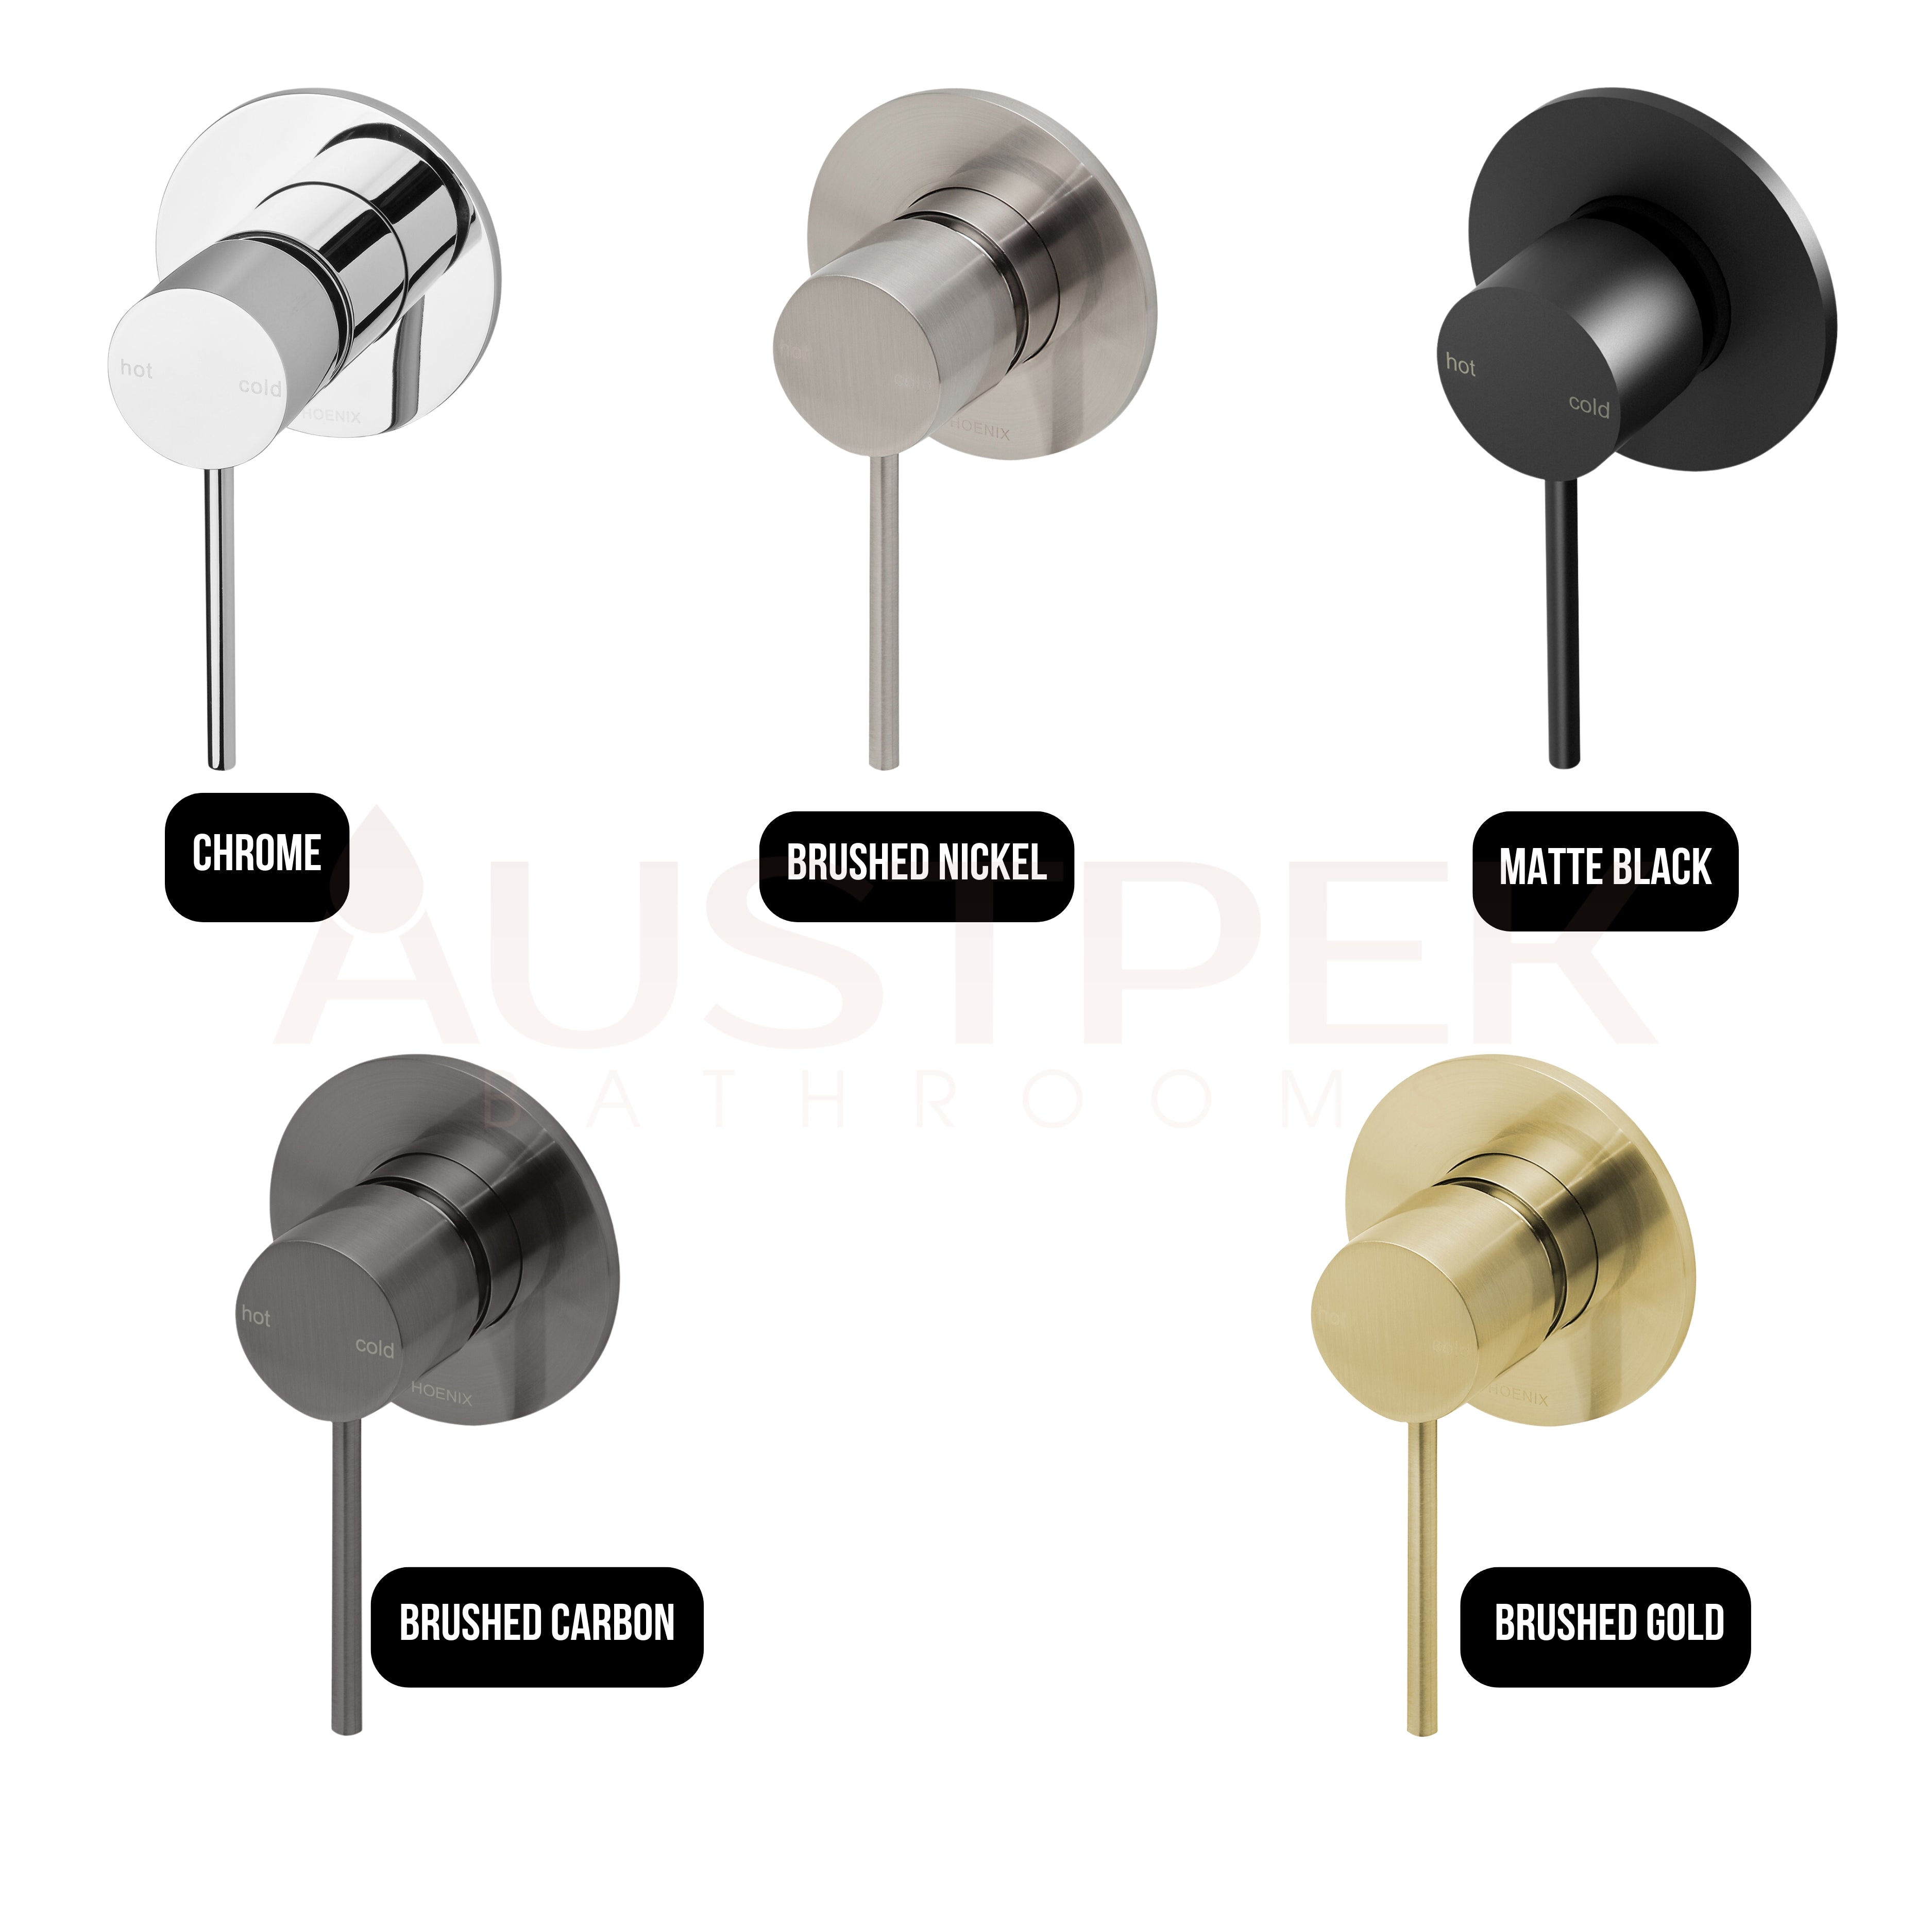 PHOENIX VIVID SLIMLINE SWITCHMIX SHOWER / WALL MIXER FIT-OFF AND ROUGH-IN KIT BRUSHED GOLD